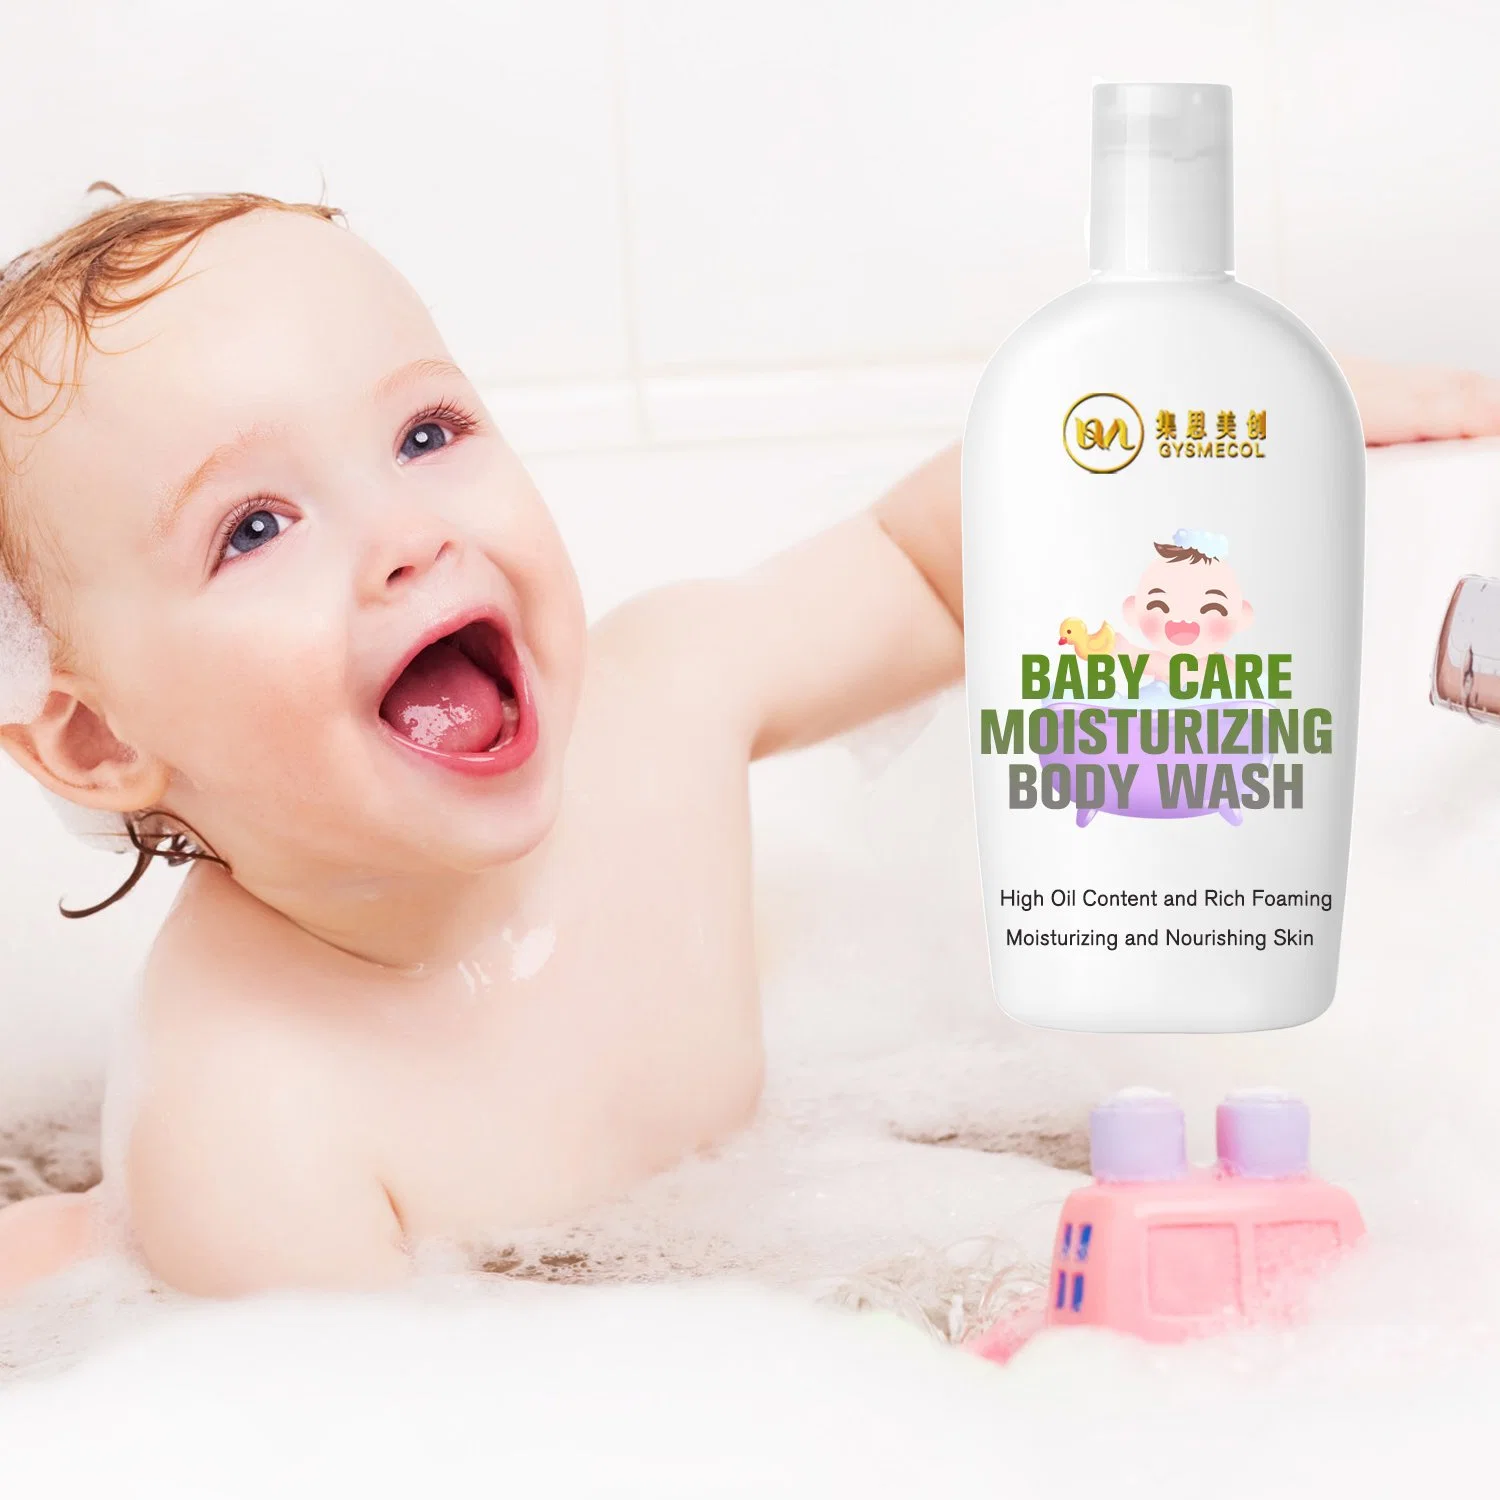 Baby Care Bath Product Tear-Free Shower Gel for Skin Care